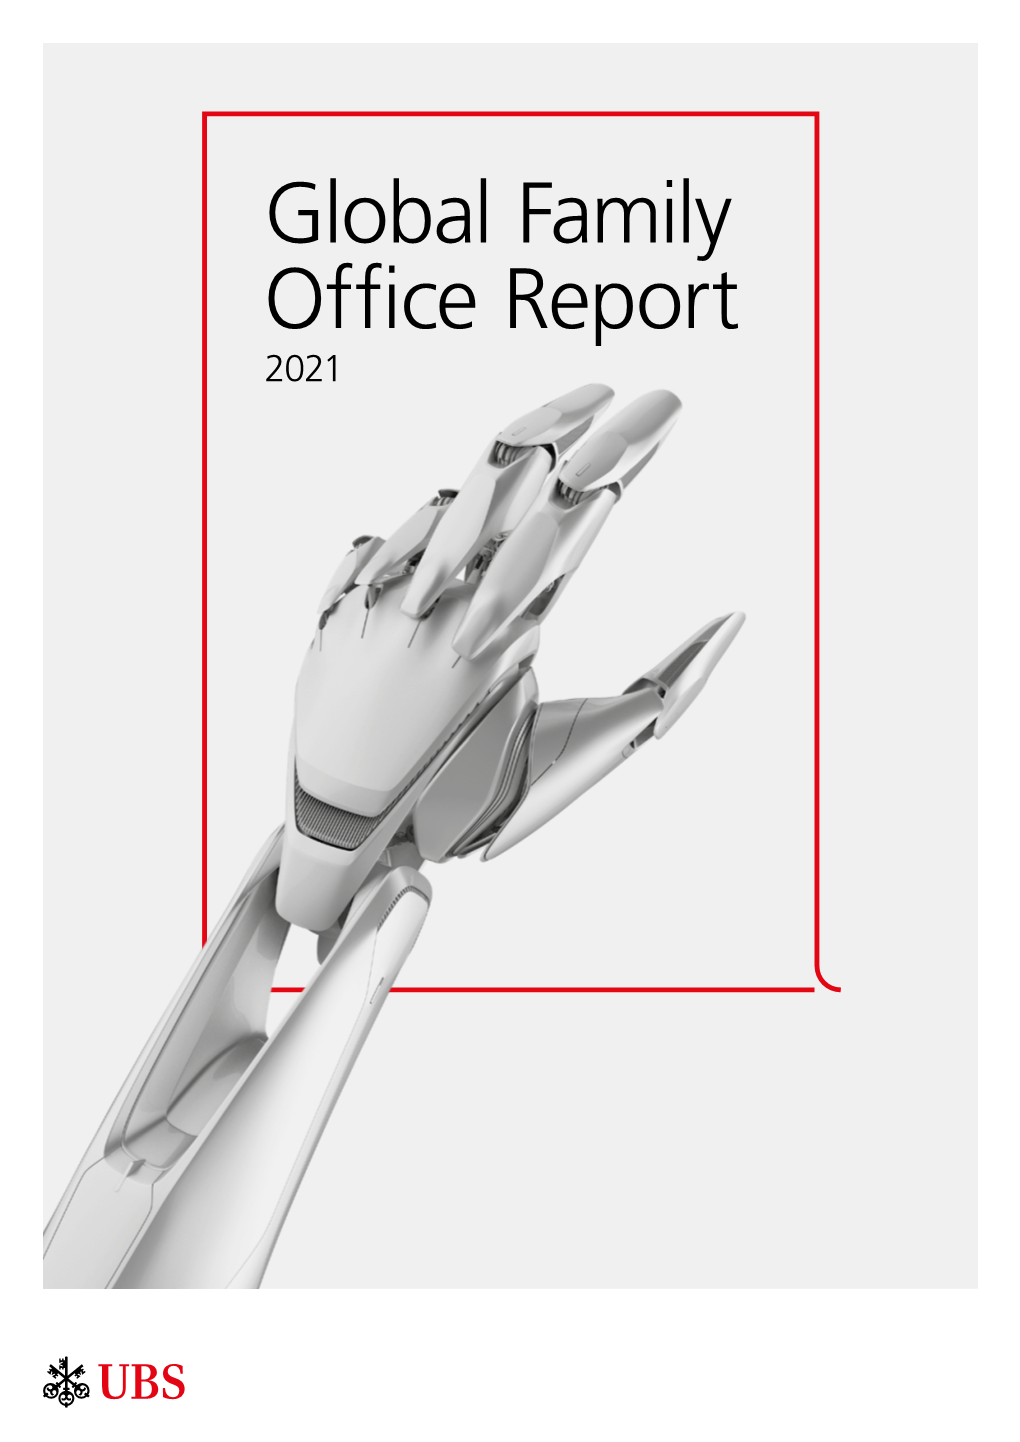 UBS Global Family Office Report 2021